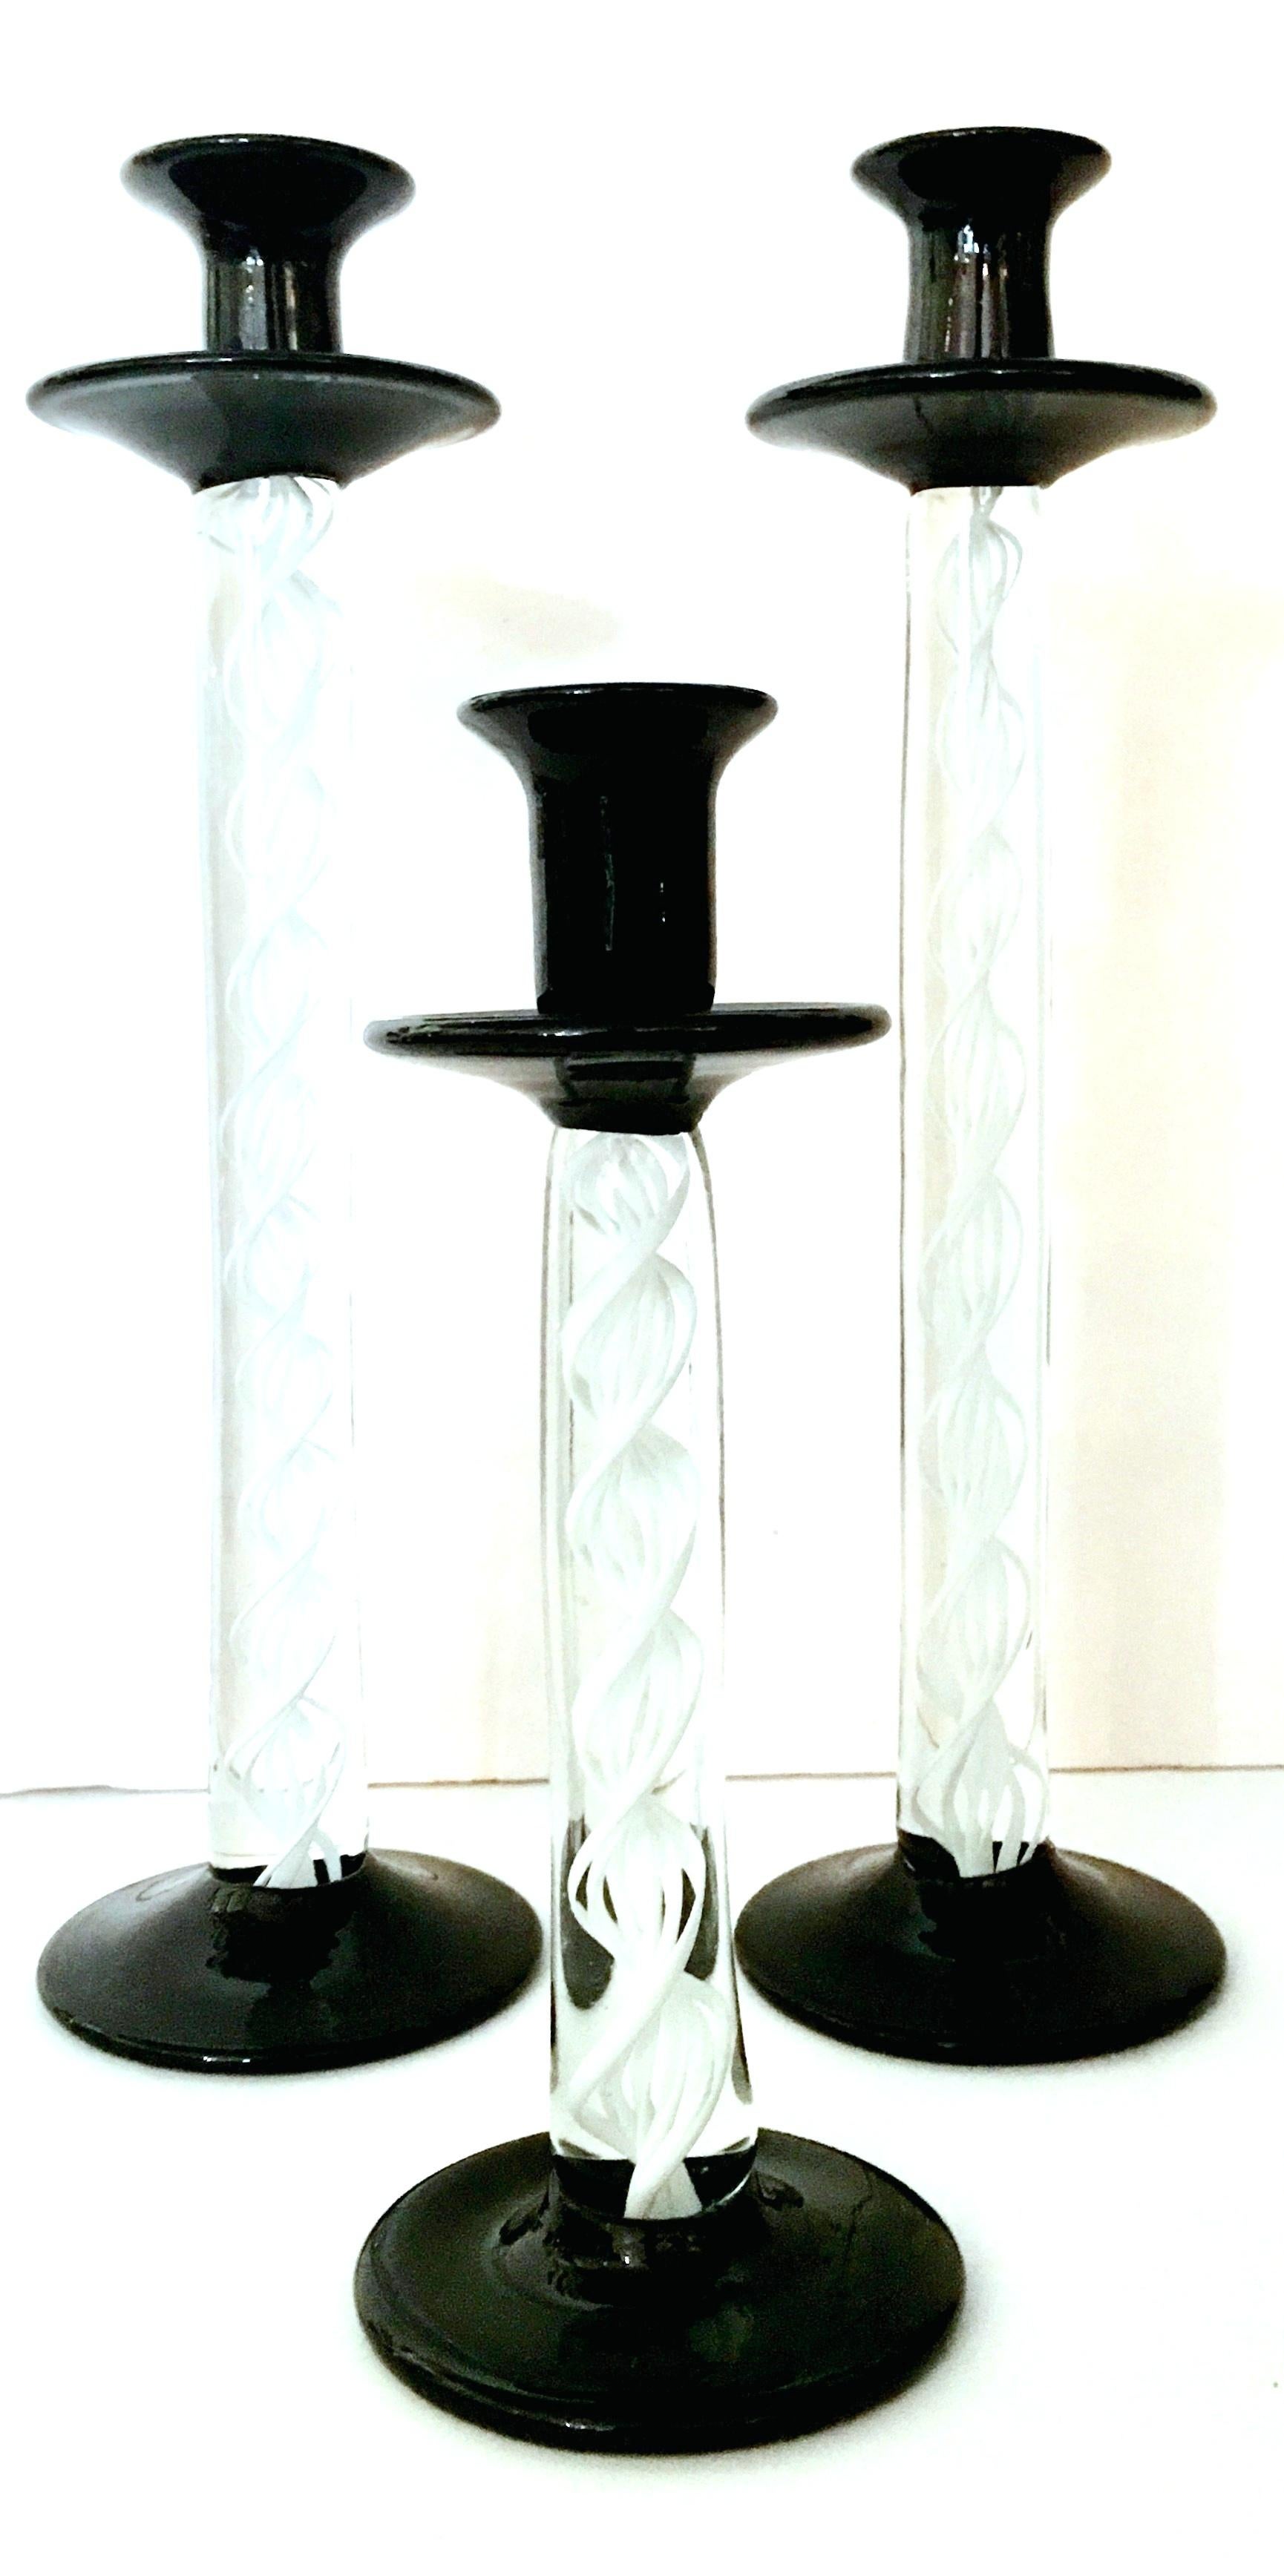 1980'S Italian Murano glass candlesticks set of three pieces. Features a translucent body with white cased swirl detail and black foot and holder. Small candlestick measures, 9.5